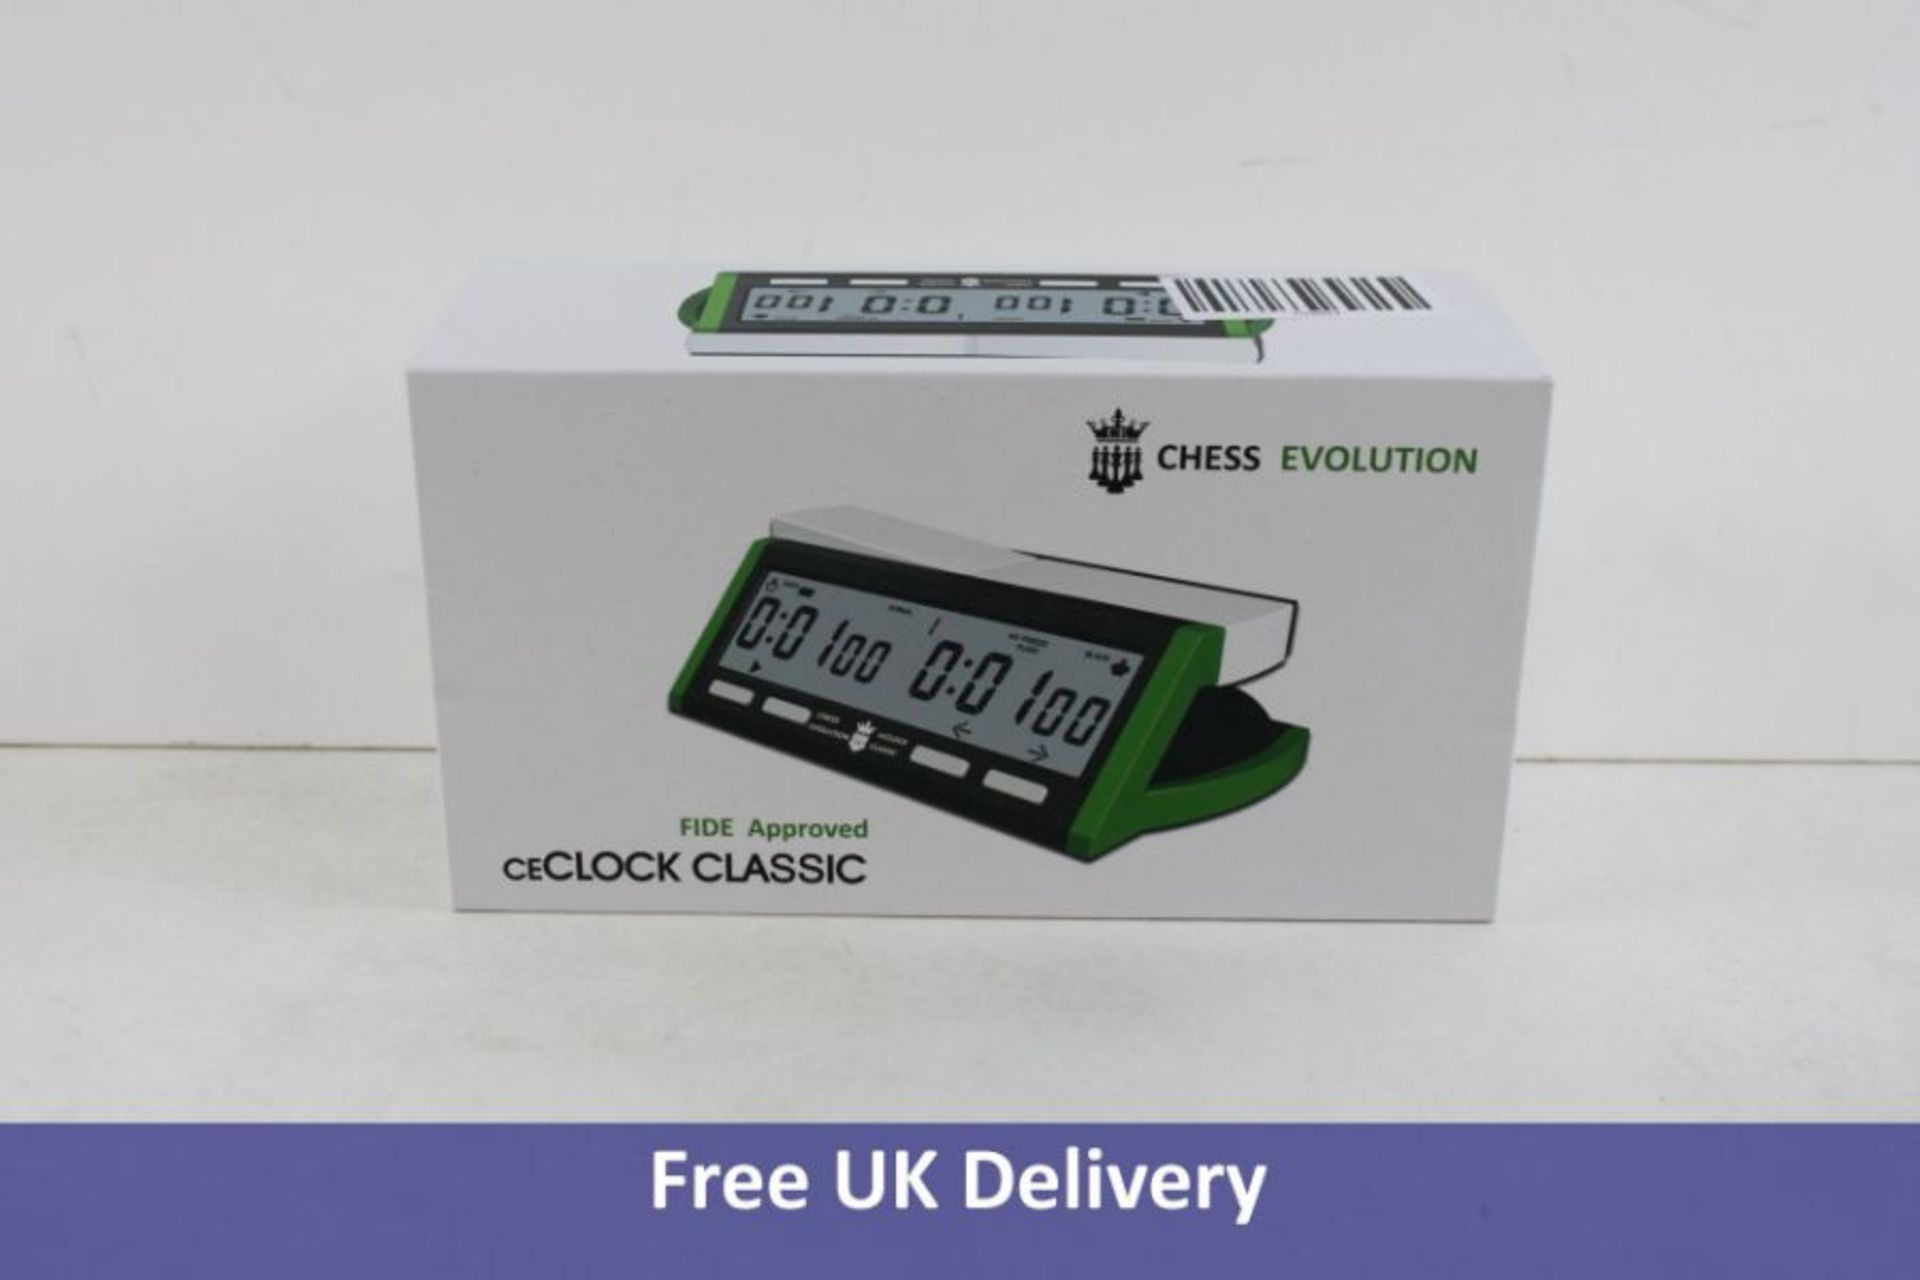 Chess Evolution Fide Approved CE Classic Clock, Black and Green